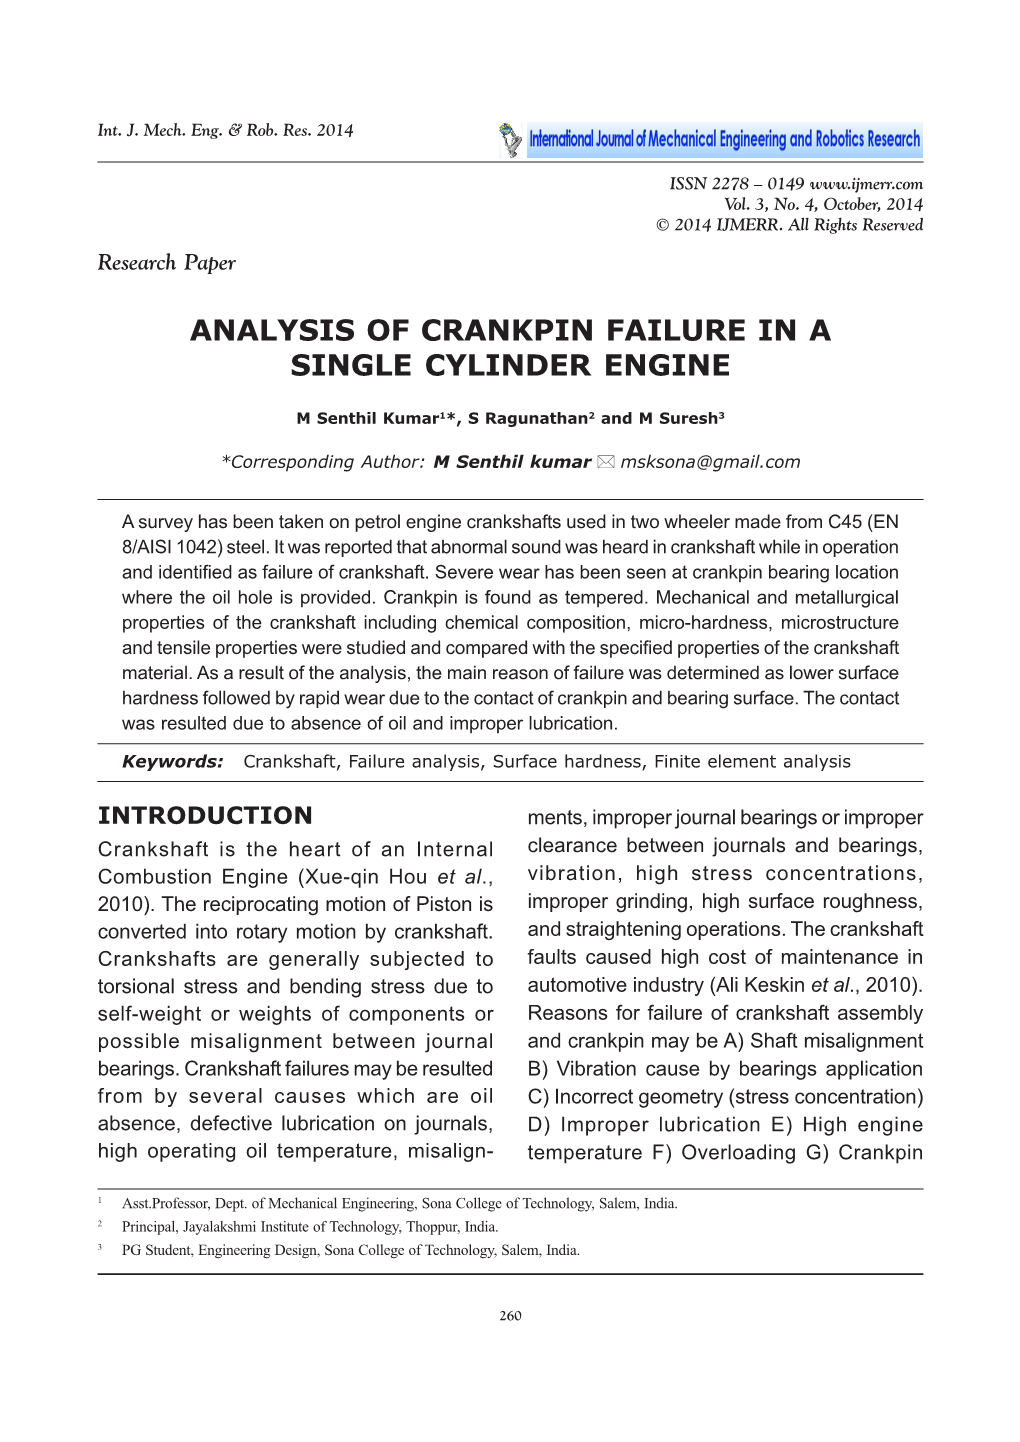 Analysis of Crankpin Failure in a Single Cylinder Engine